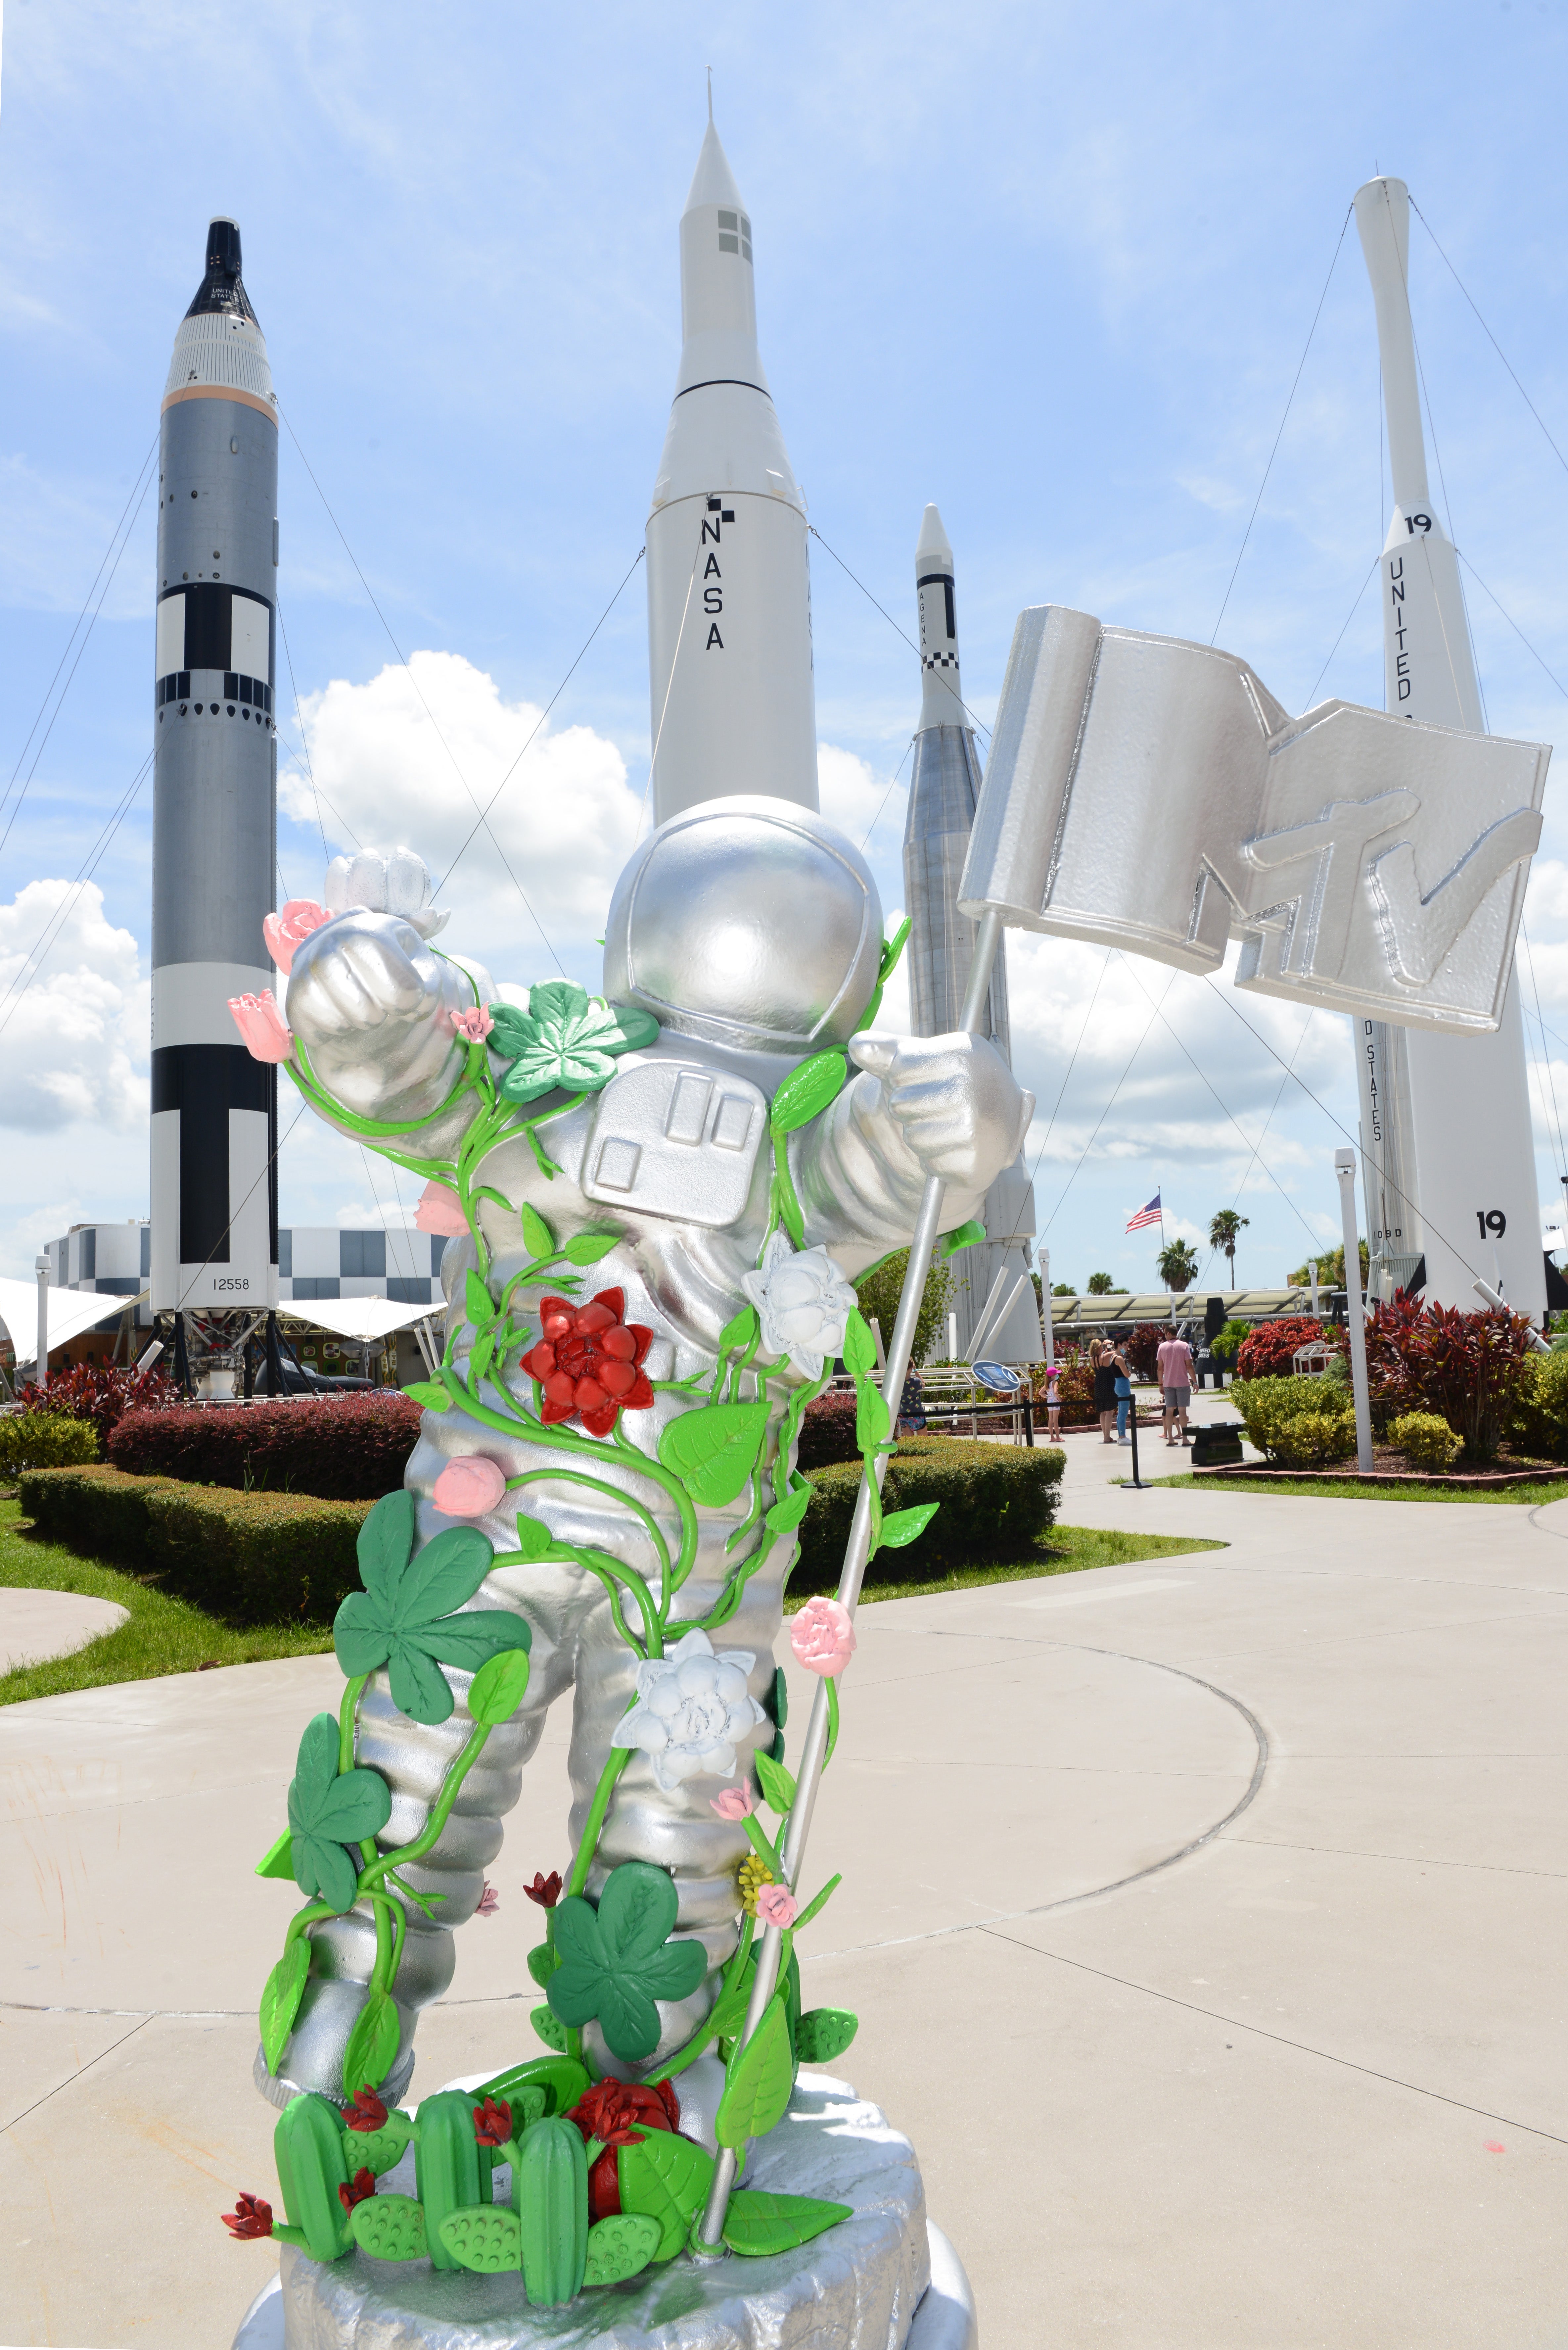 MTV unveils special edition large-scale Moon Person at Kennedy Space Center